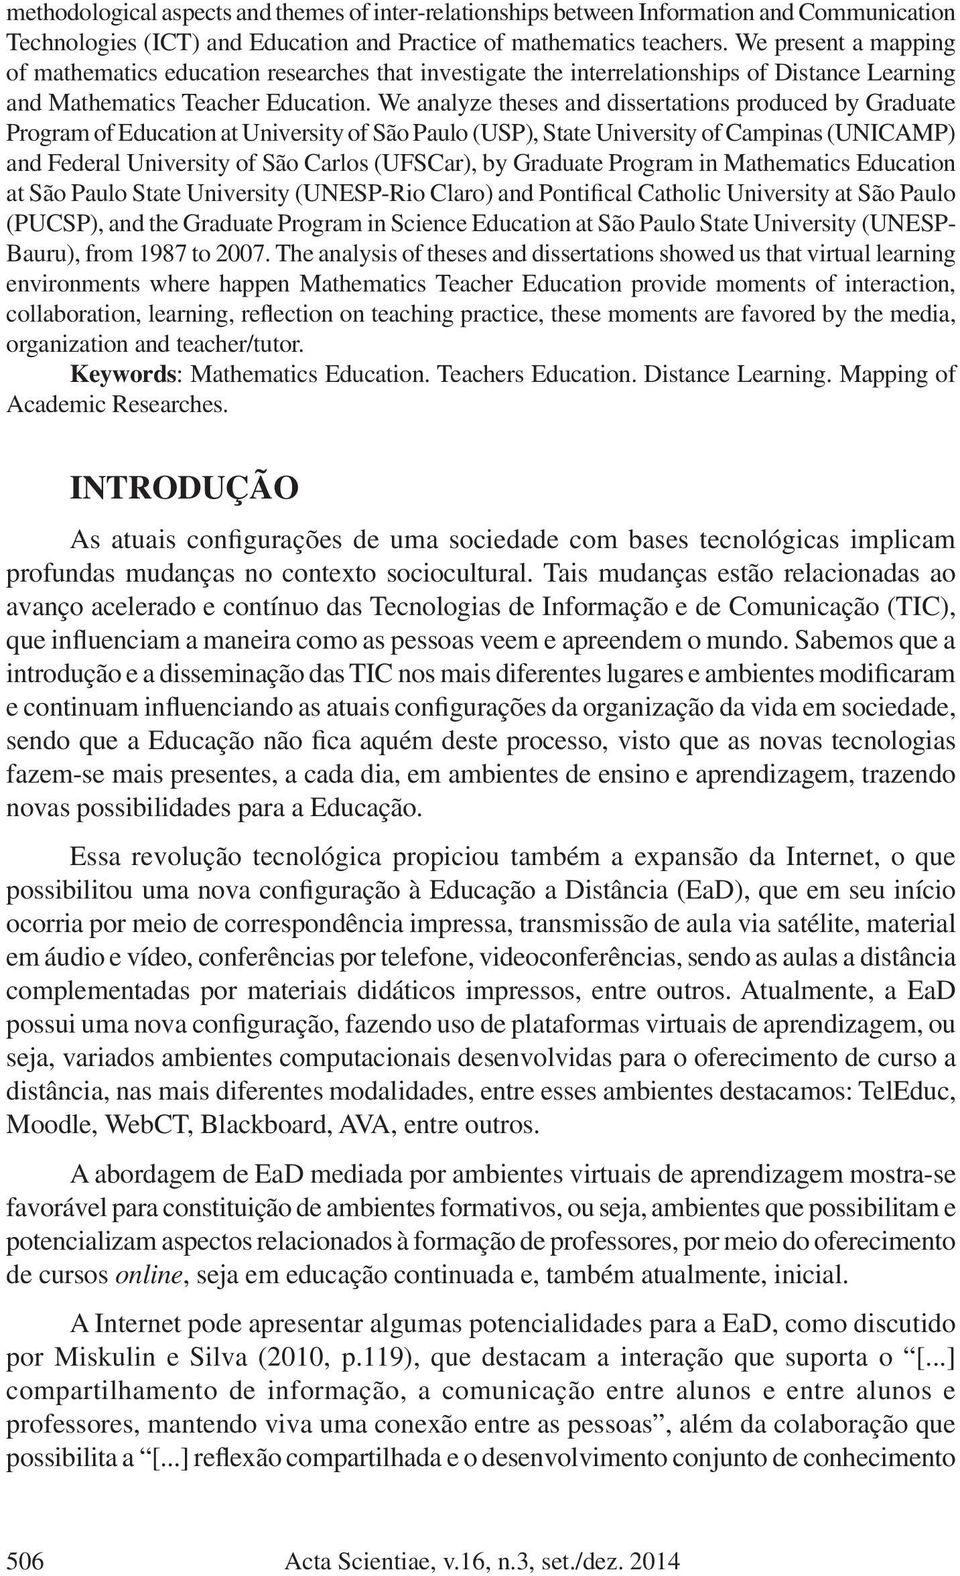 We analyze theses and dissertations produced by Graduate Program of Education at University of São Paulo (USP), State University of Campinas (UNICAMP) and Federal University of São Carlos (UFSCar),